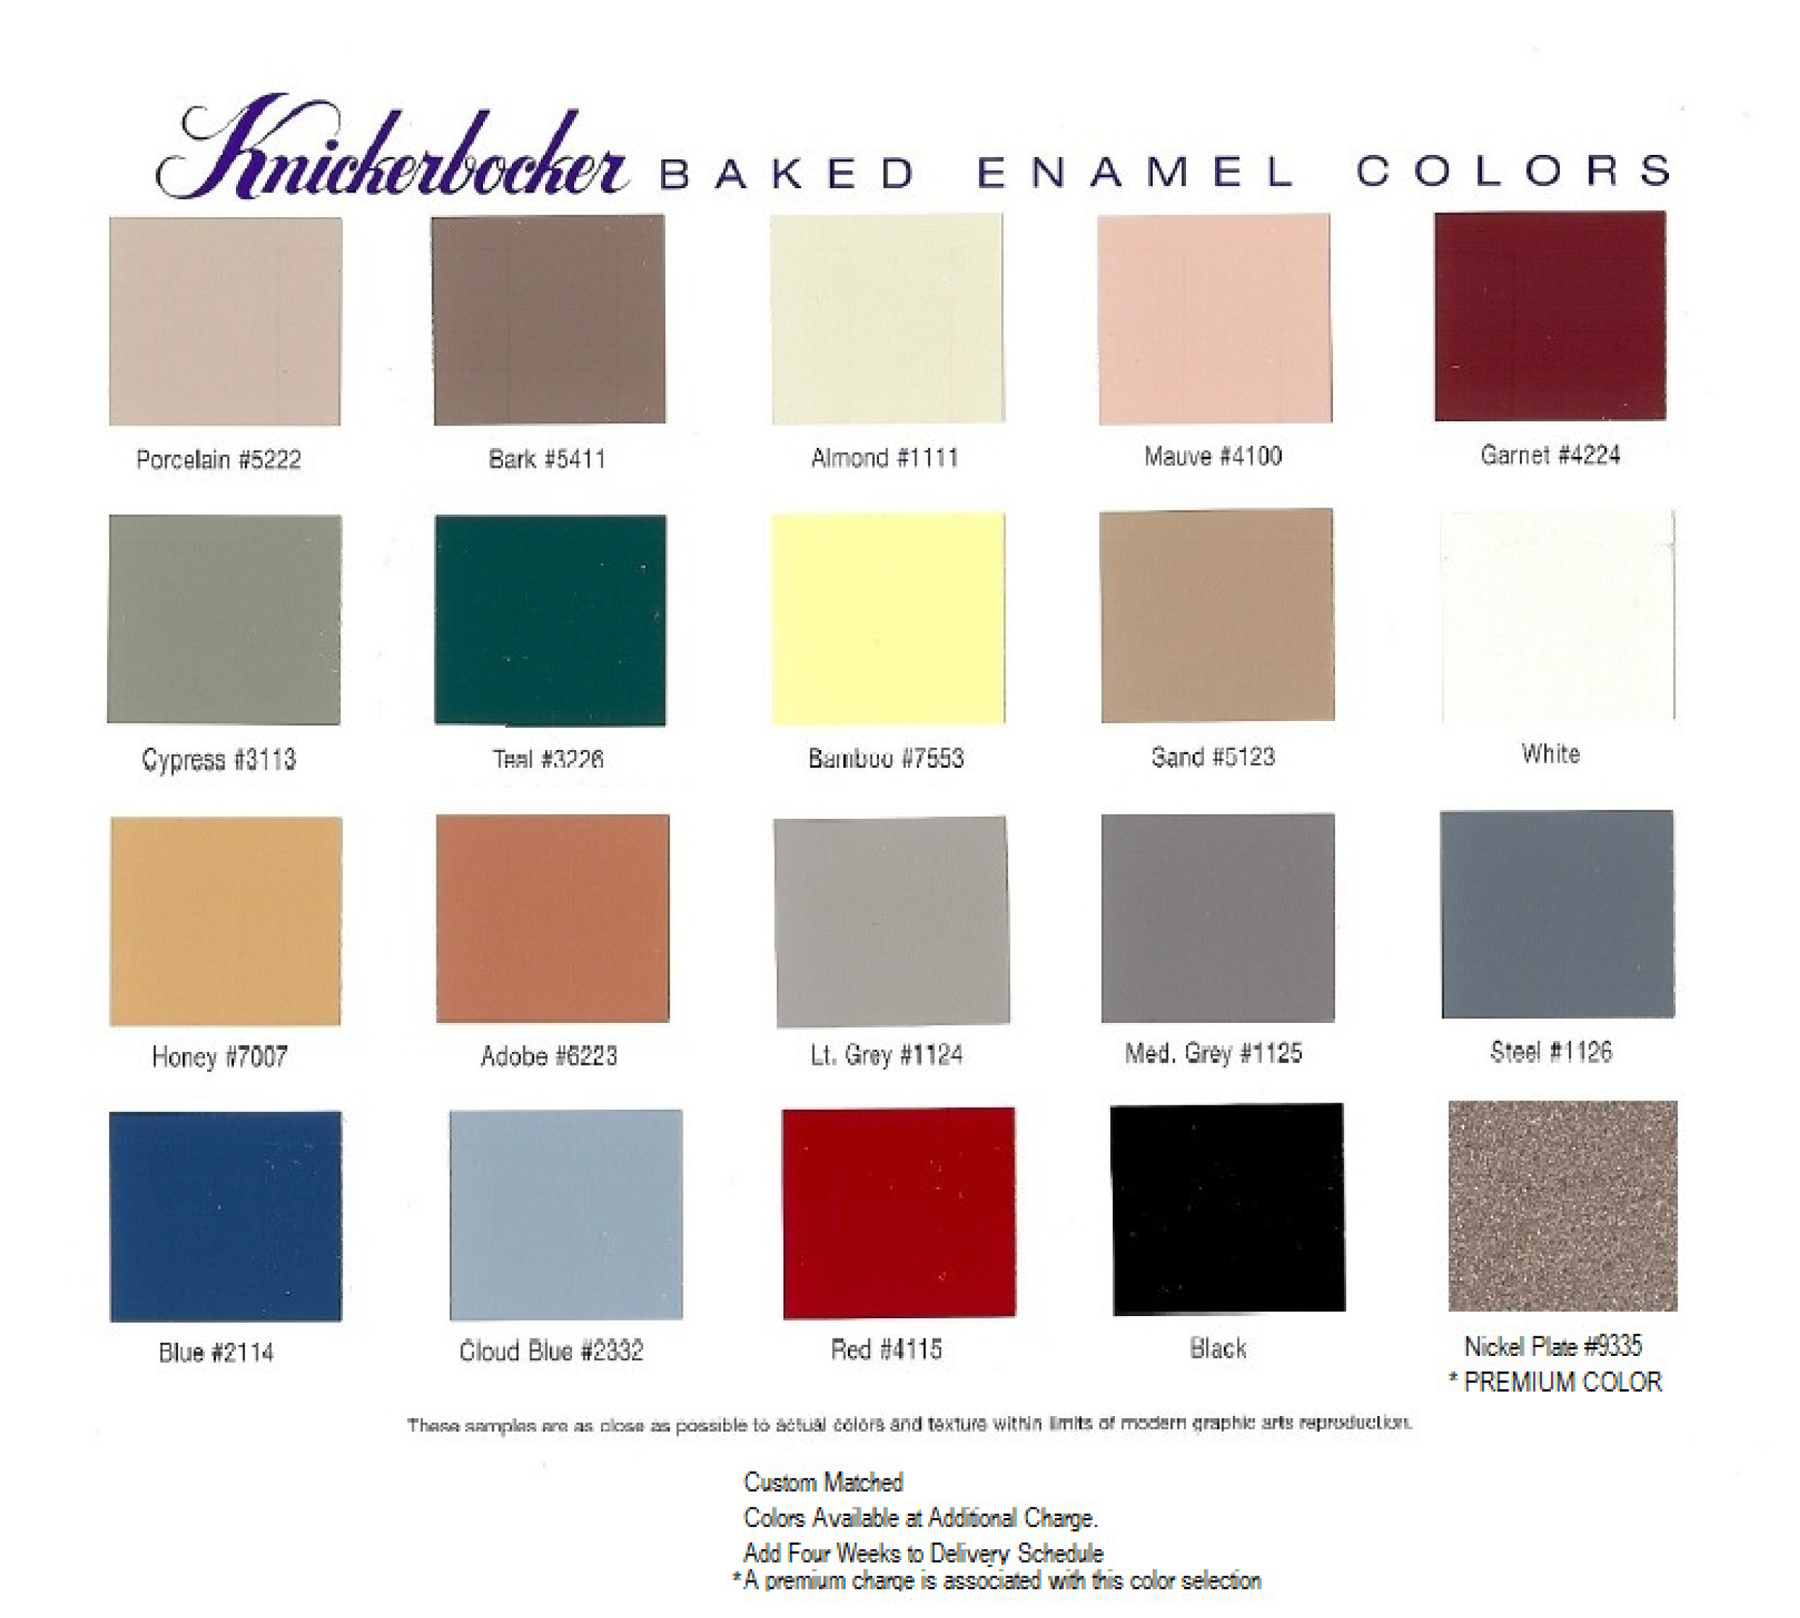 Hadrian Toilet Partitions Color Chart